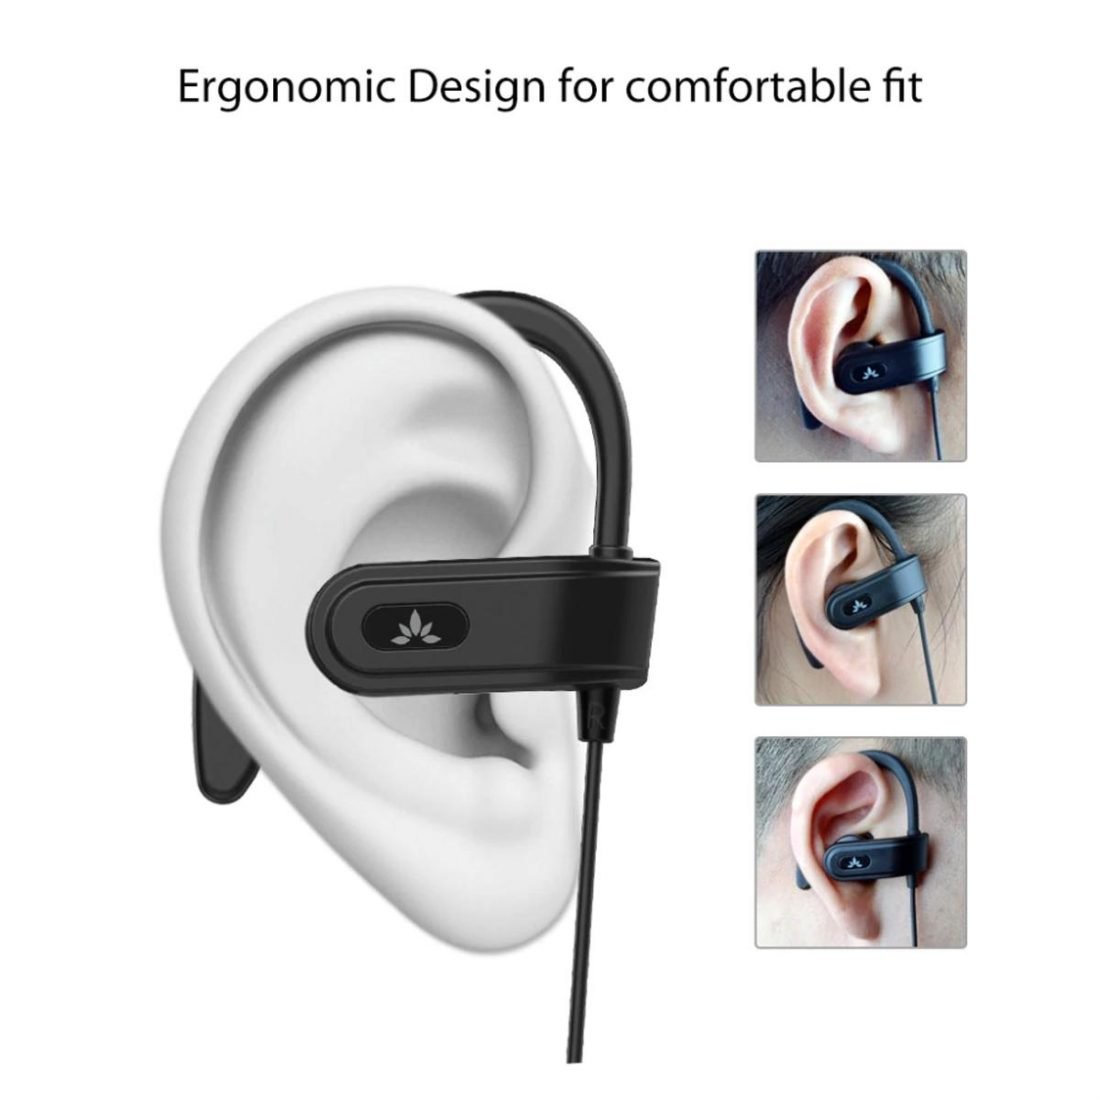 Sample Around-the-ear earbuds - Avantree E171 (From: Amazon)